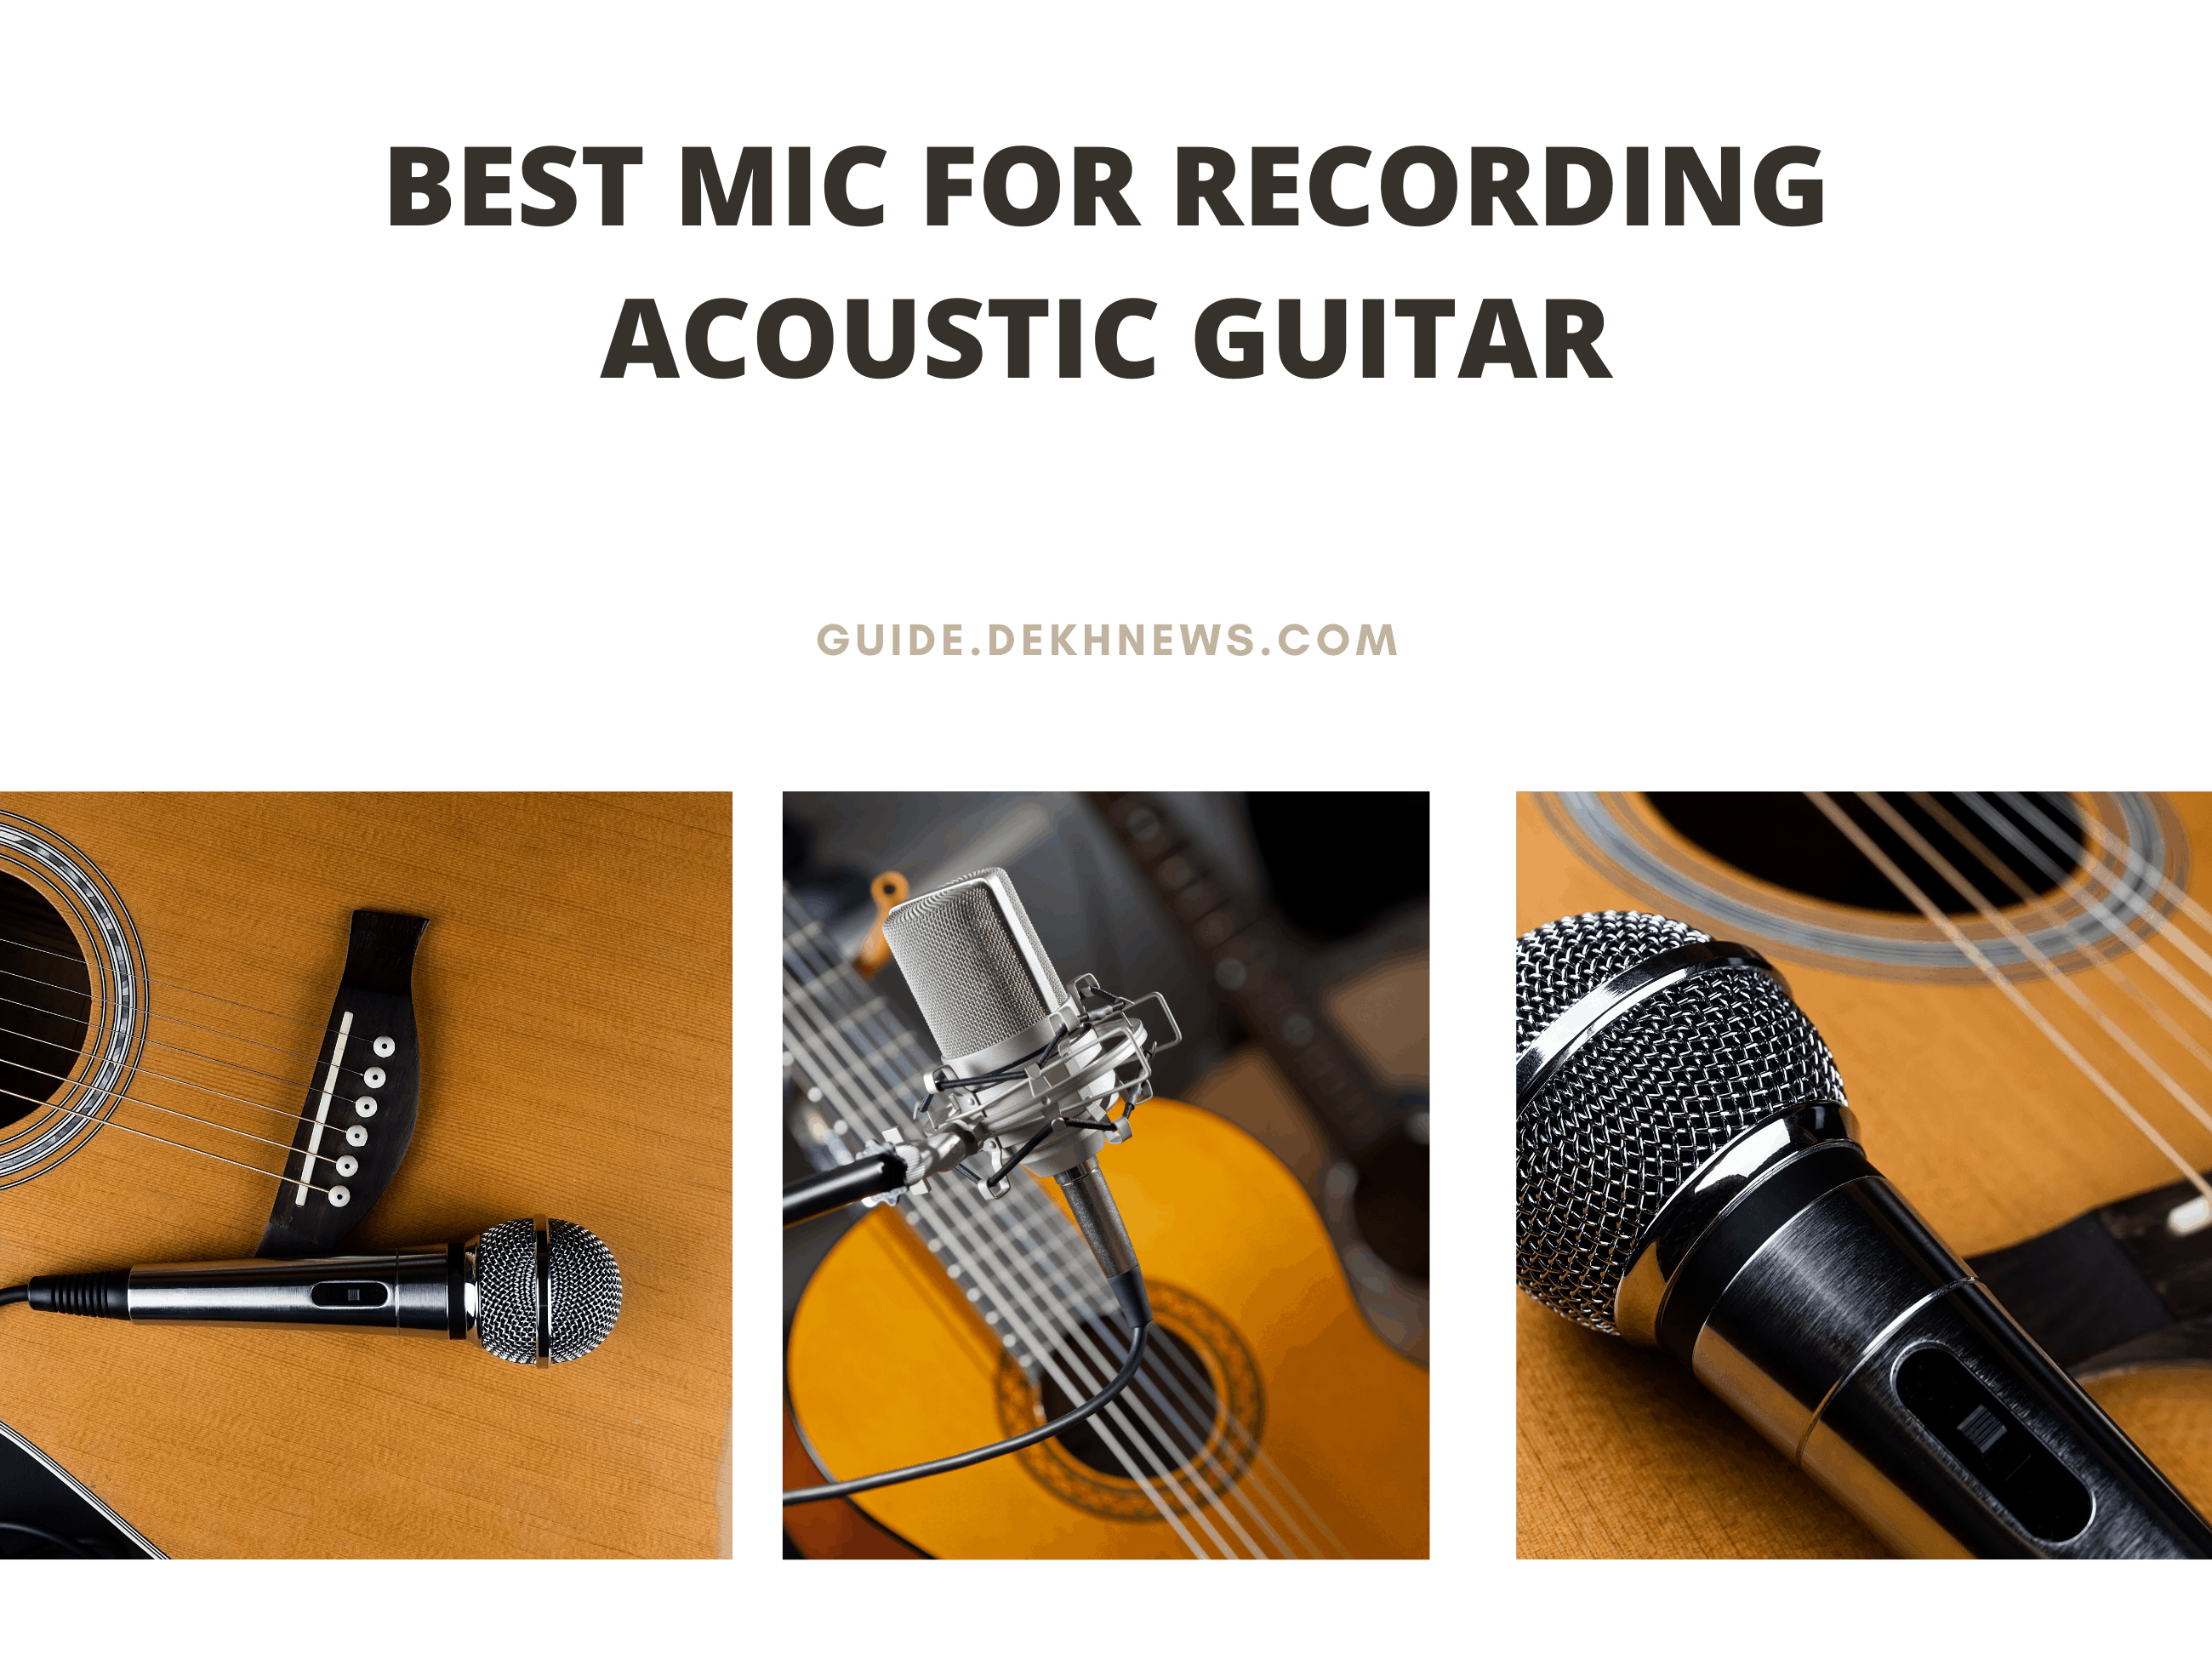 7 Best Mic for Recording Acoustic Guitar (2022 Reviews)